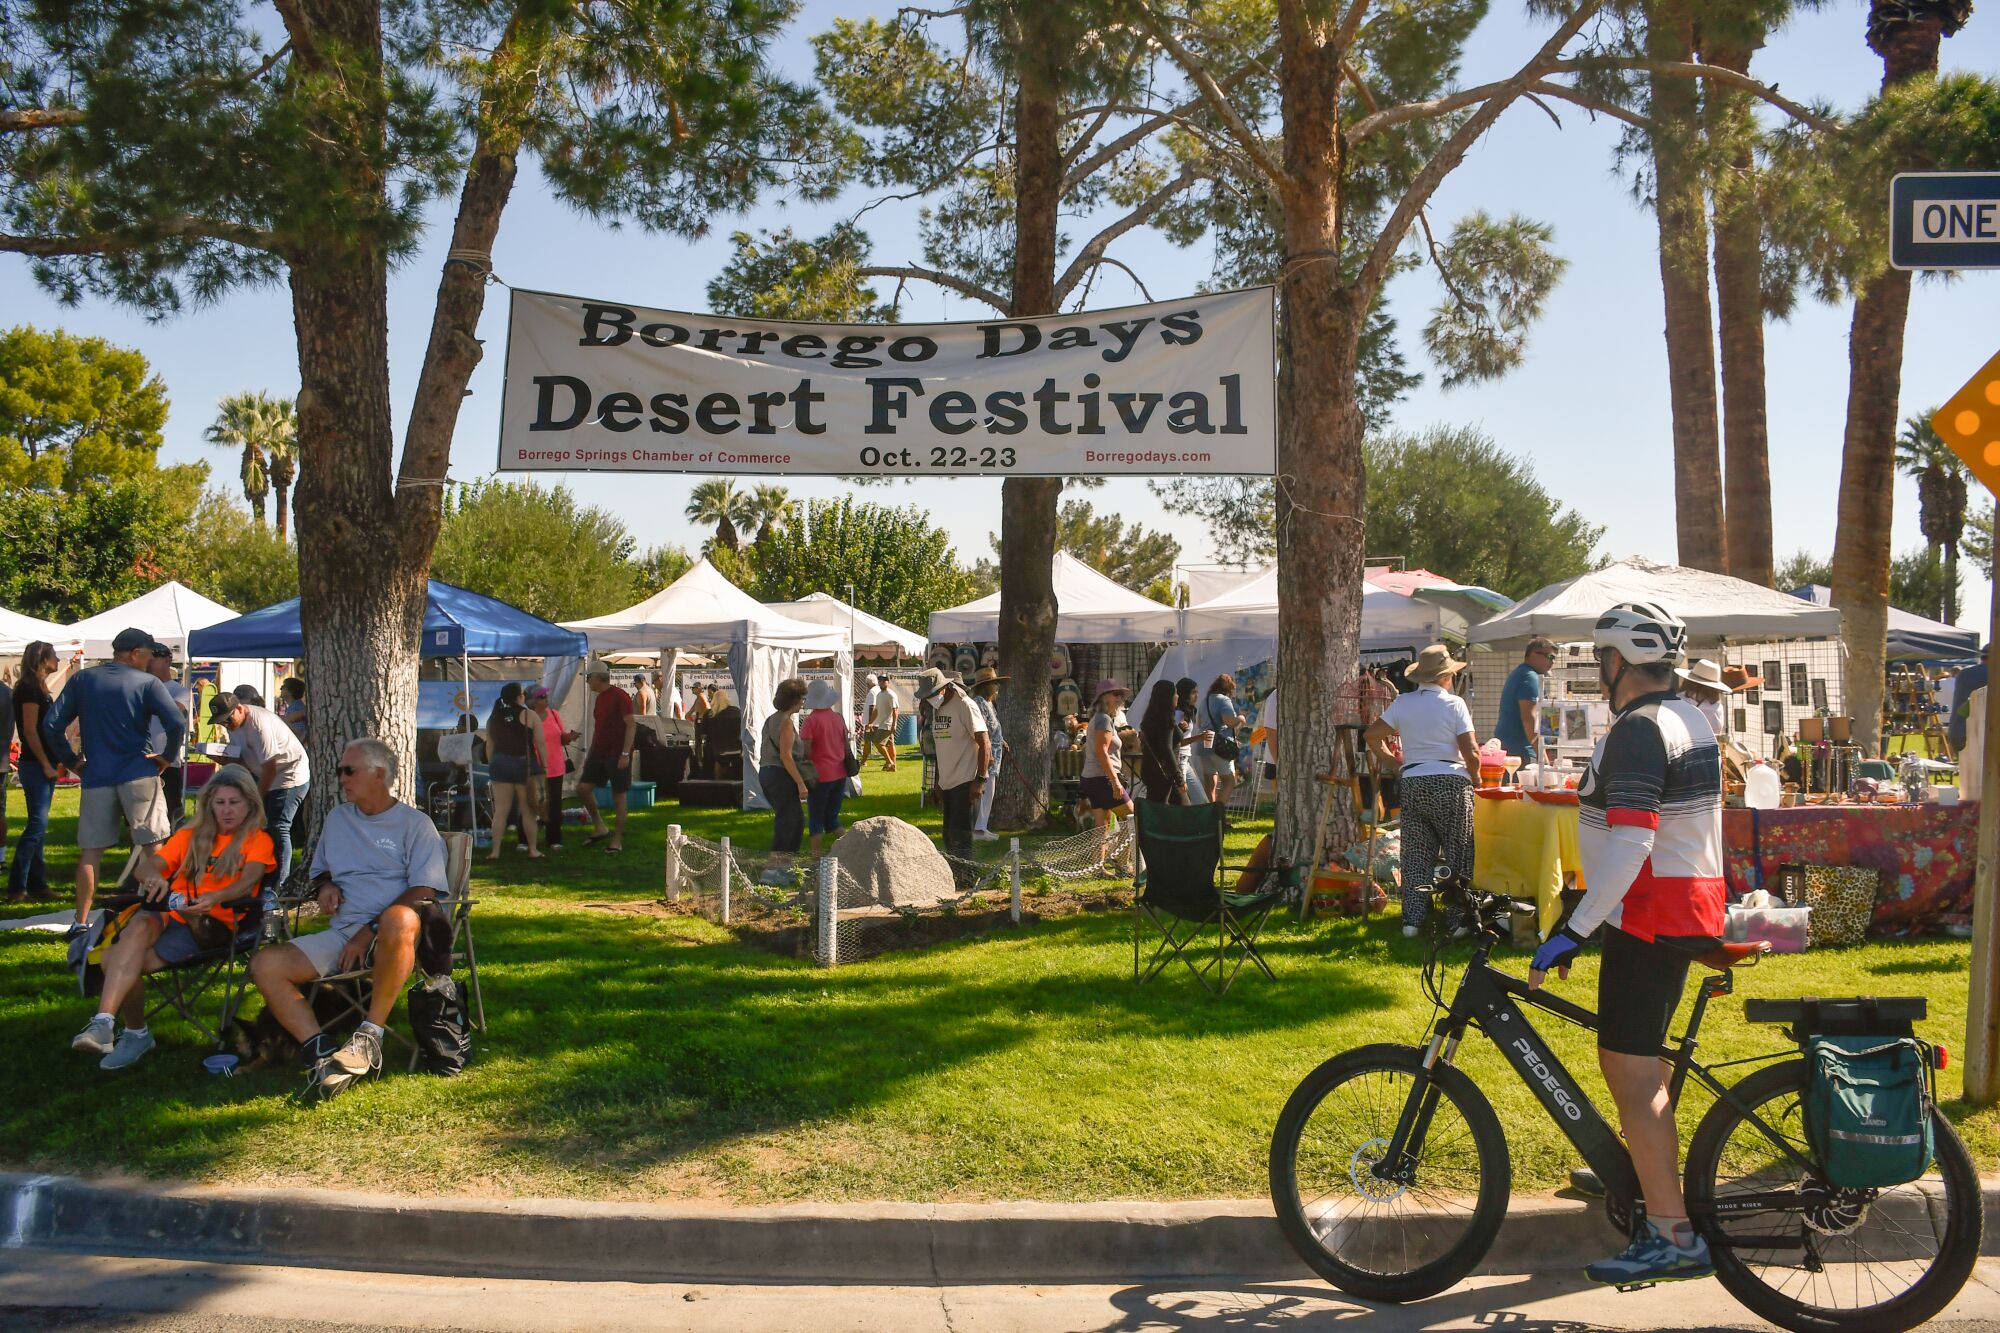 People stand around on a grassy circle with a banner strung between trees that says "Borrego Days Desert Festival."